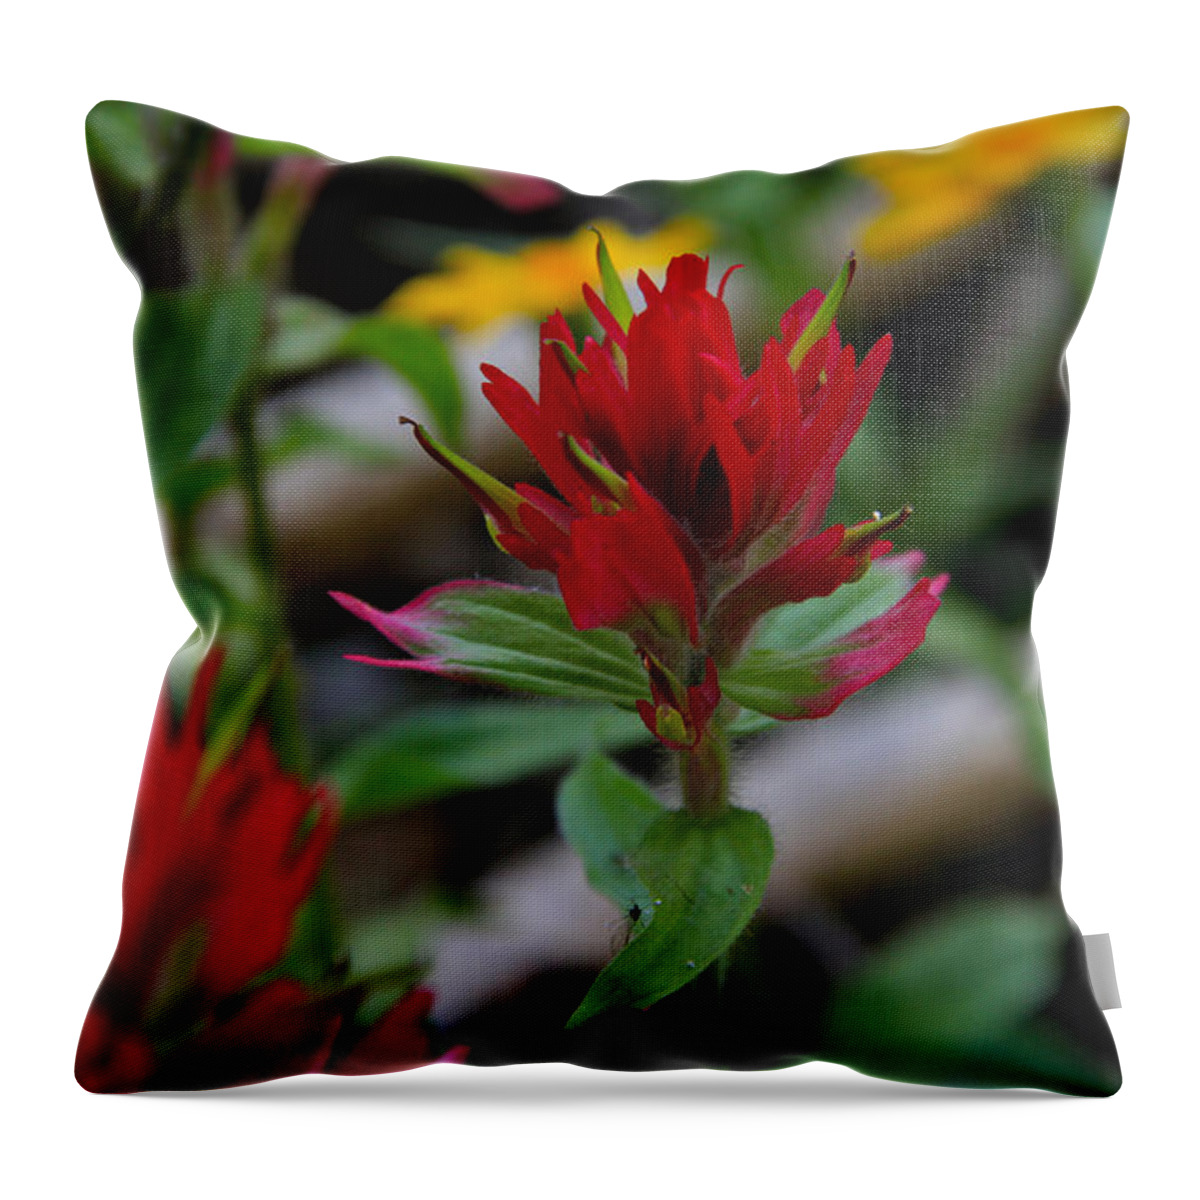 Wildflowers Throw Pillow featuring the photograph Red Paintbrush by Ed Riche